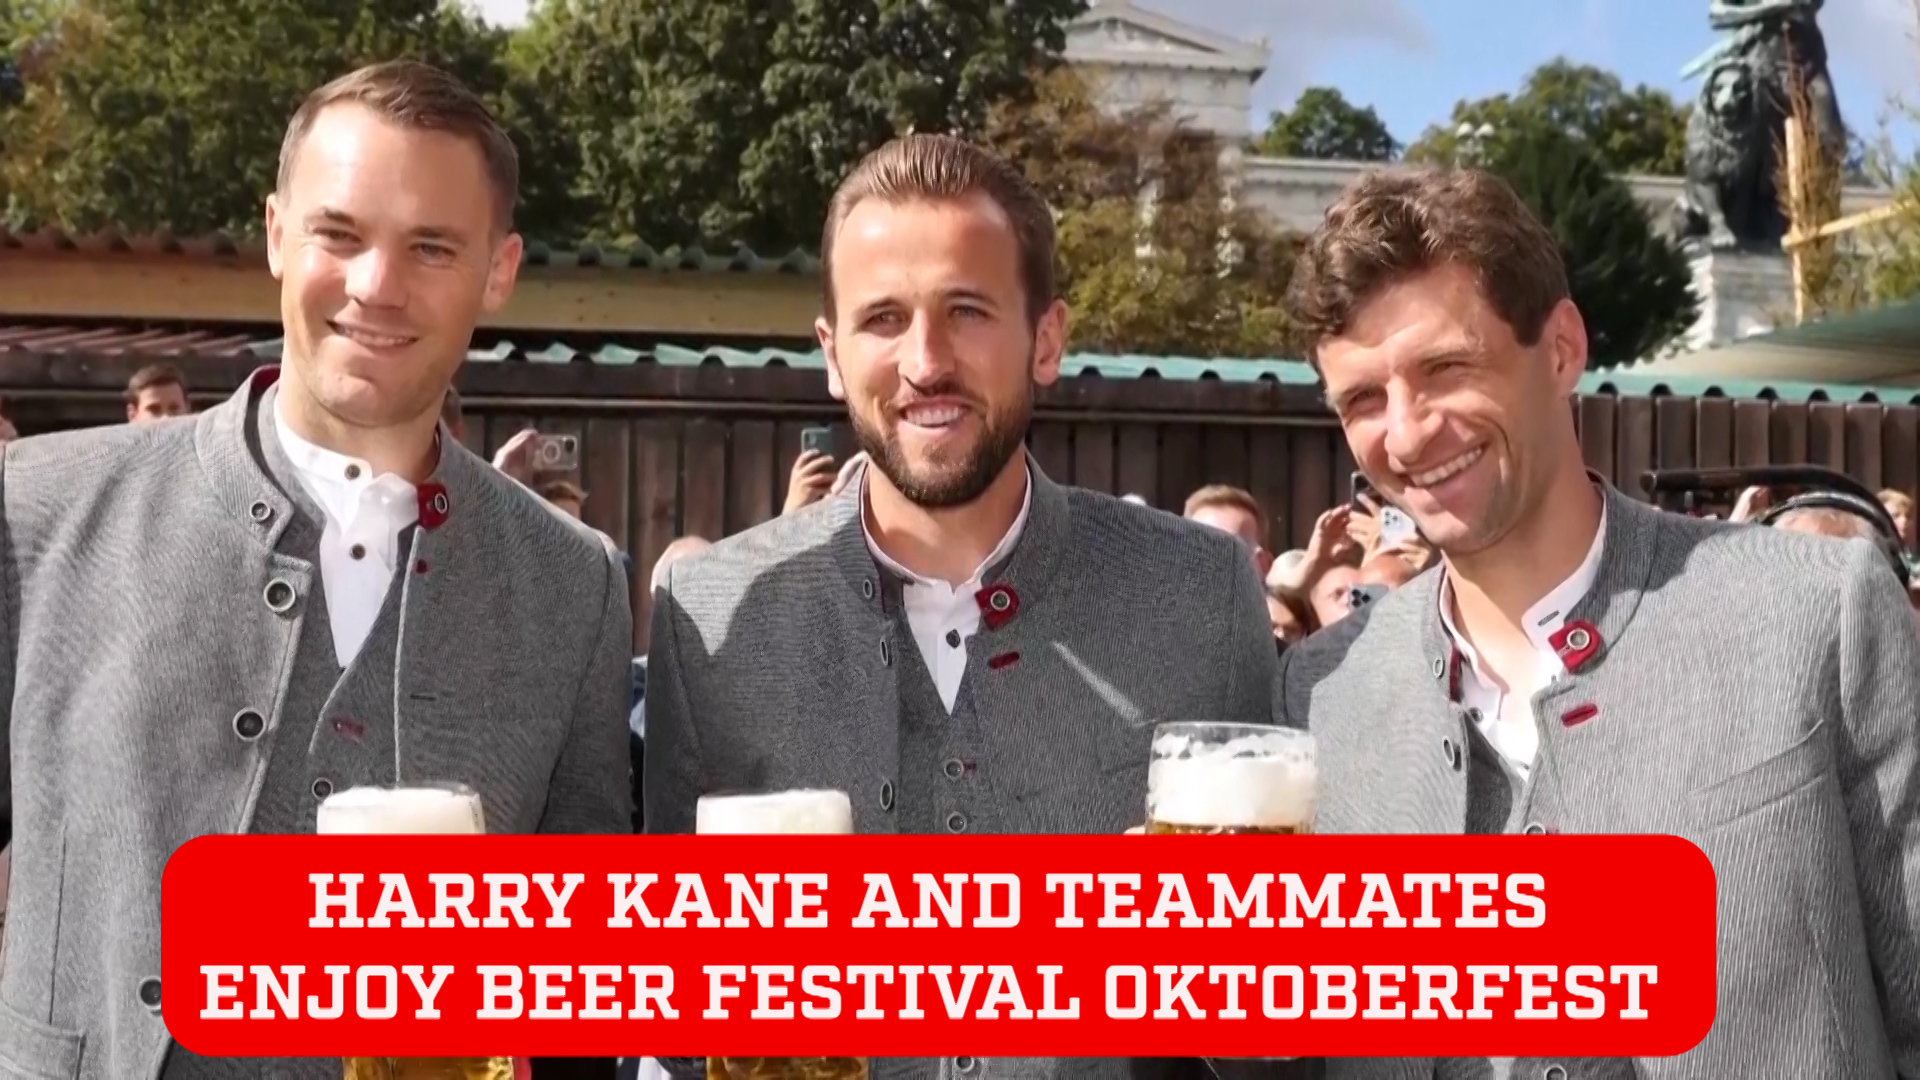 Bayern players get on the booze as they celebrate Oktoberfest in style